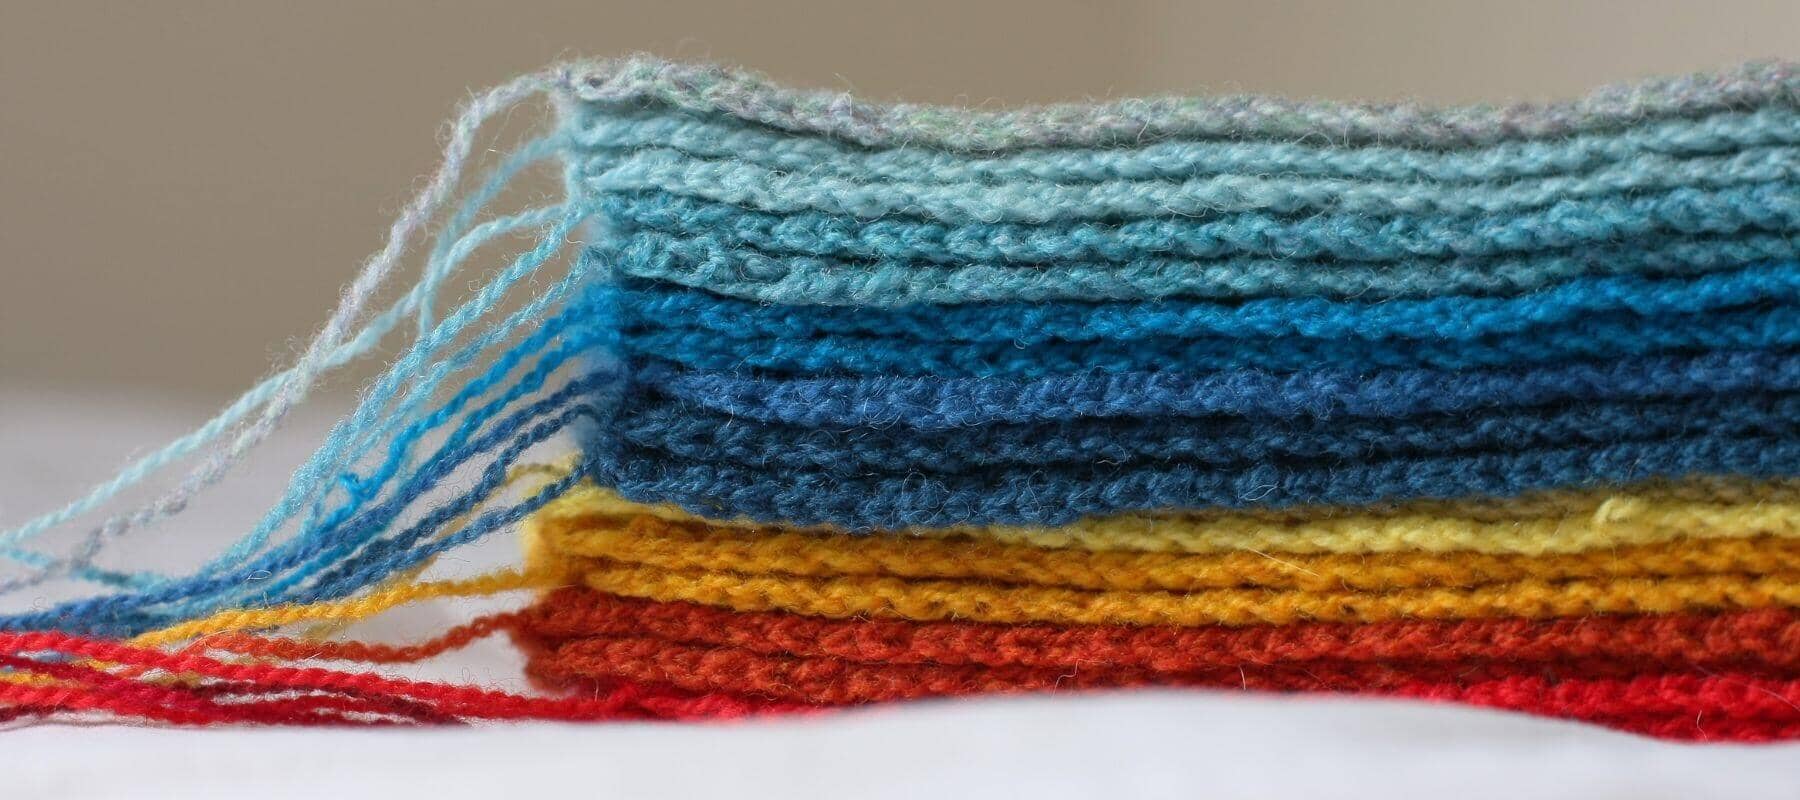 From Swatch to Success: Unraveling the Significance of Swatching in Knitting